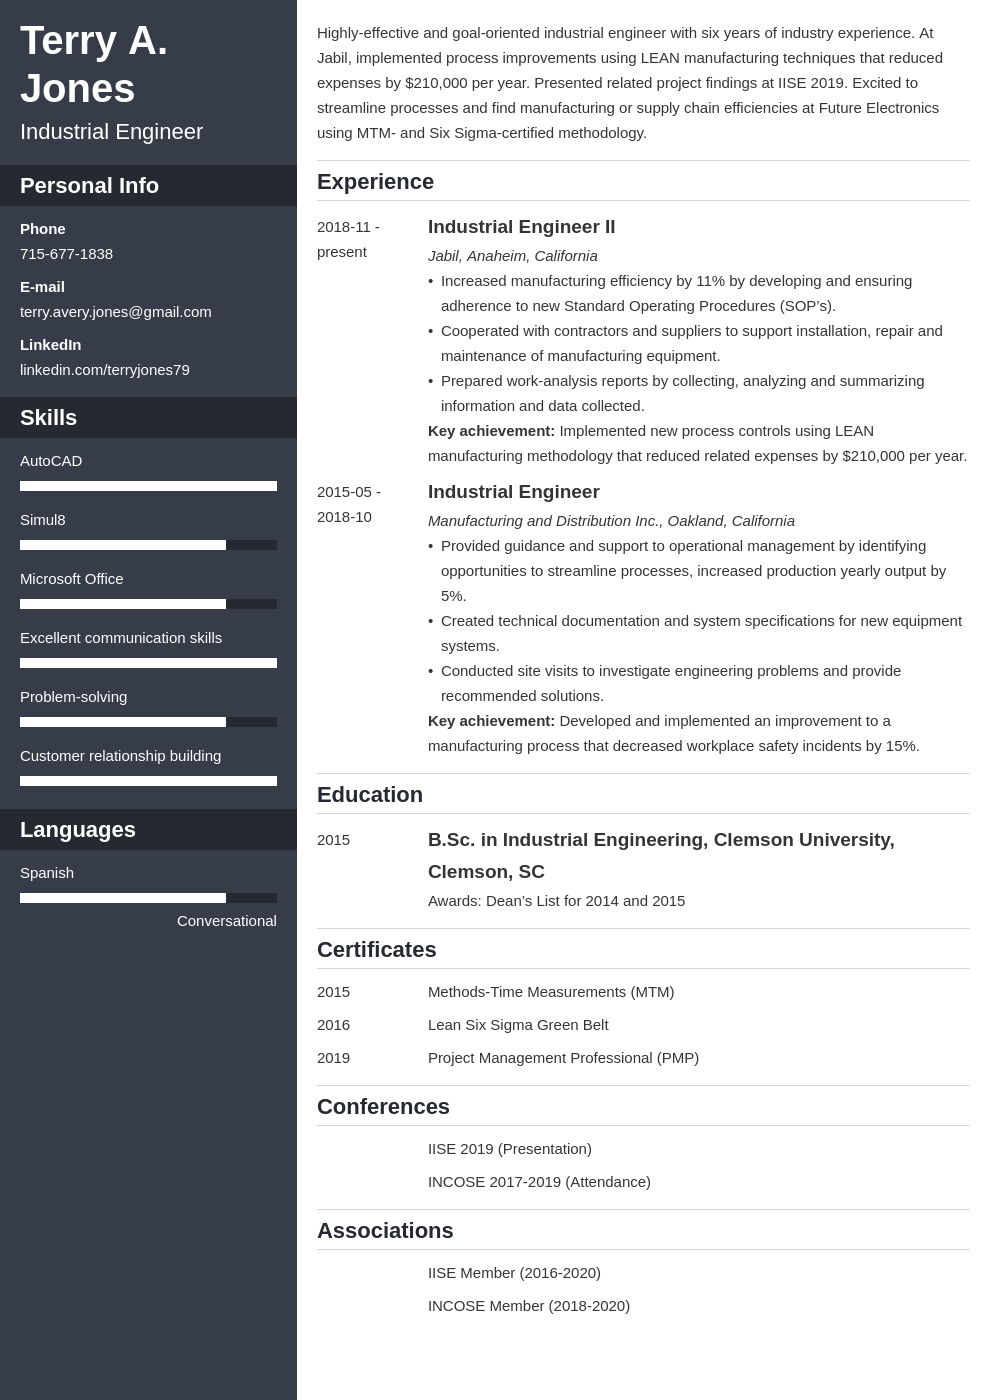 Industrial Engineer Resume Sample and Writing Guide